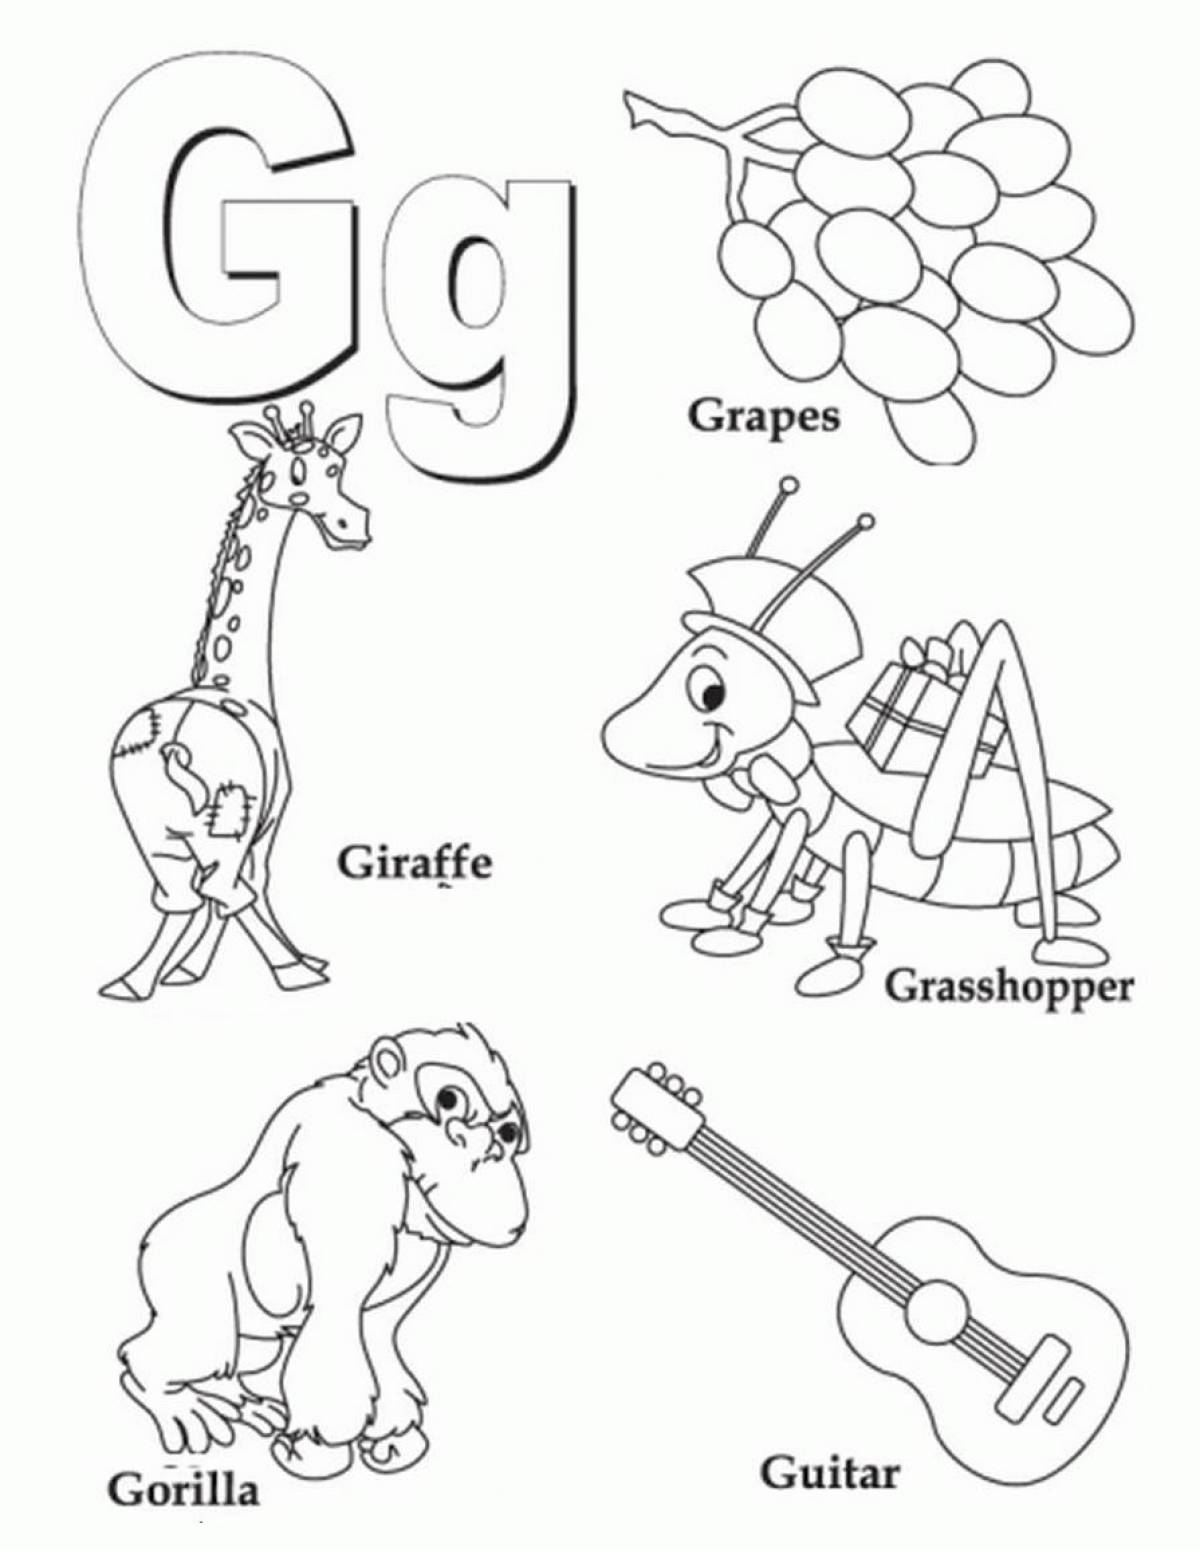 Creative alphabet coloring book for 2nd grade kids